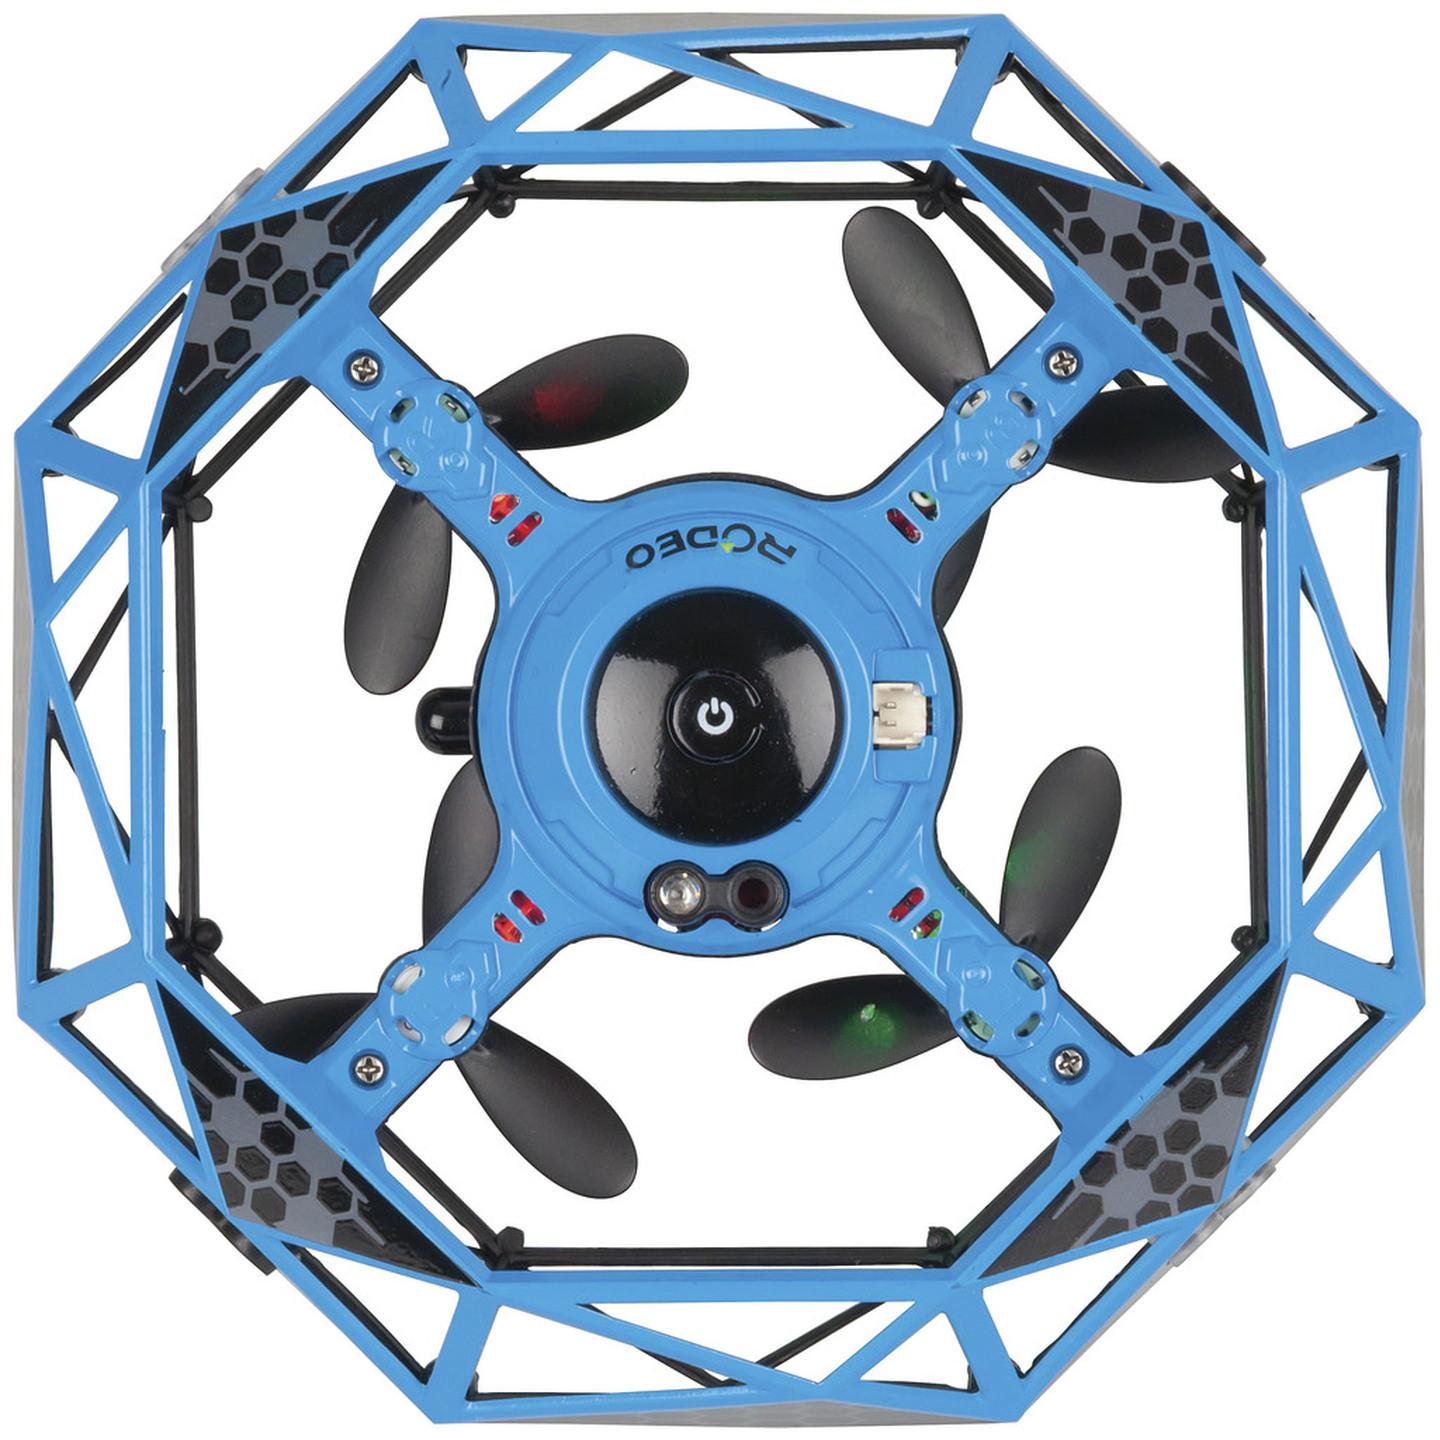 Obstacle Avoidance Quadcopter